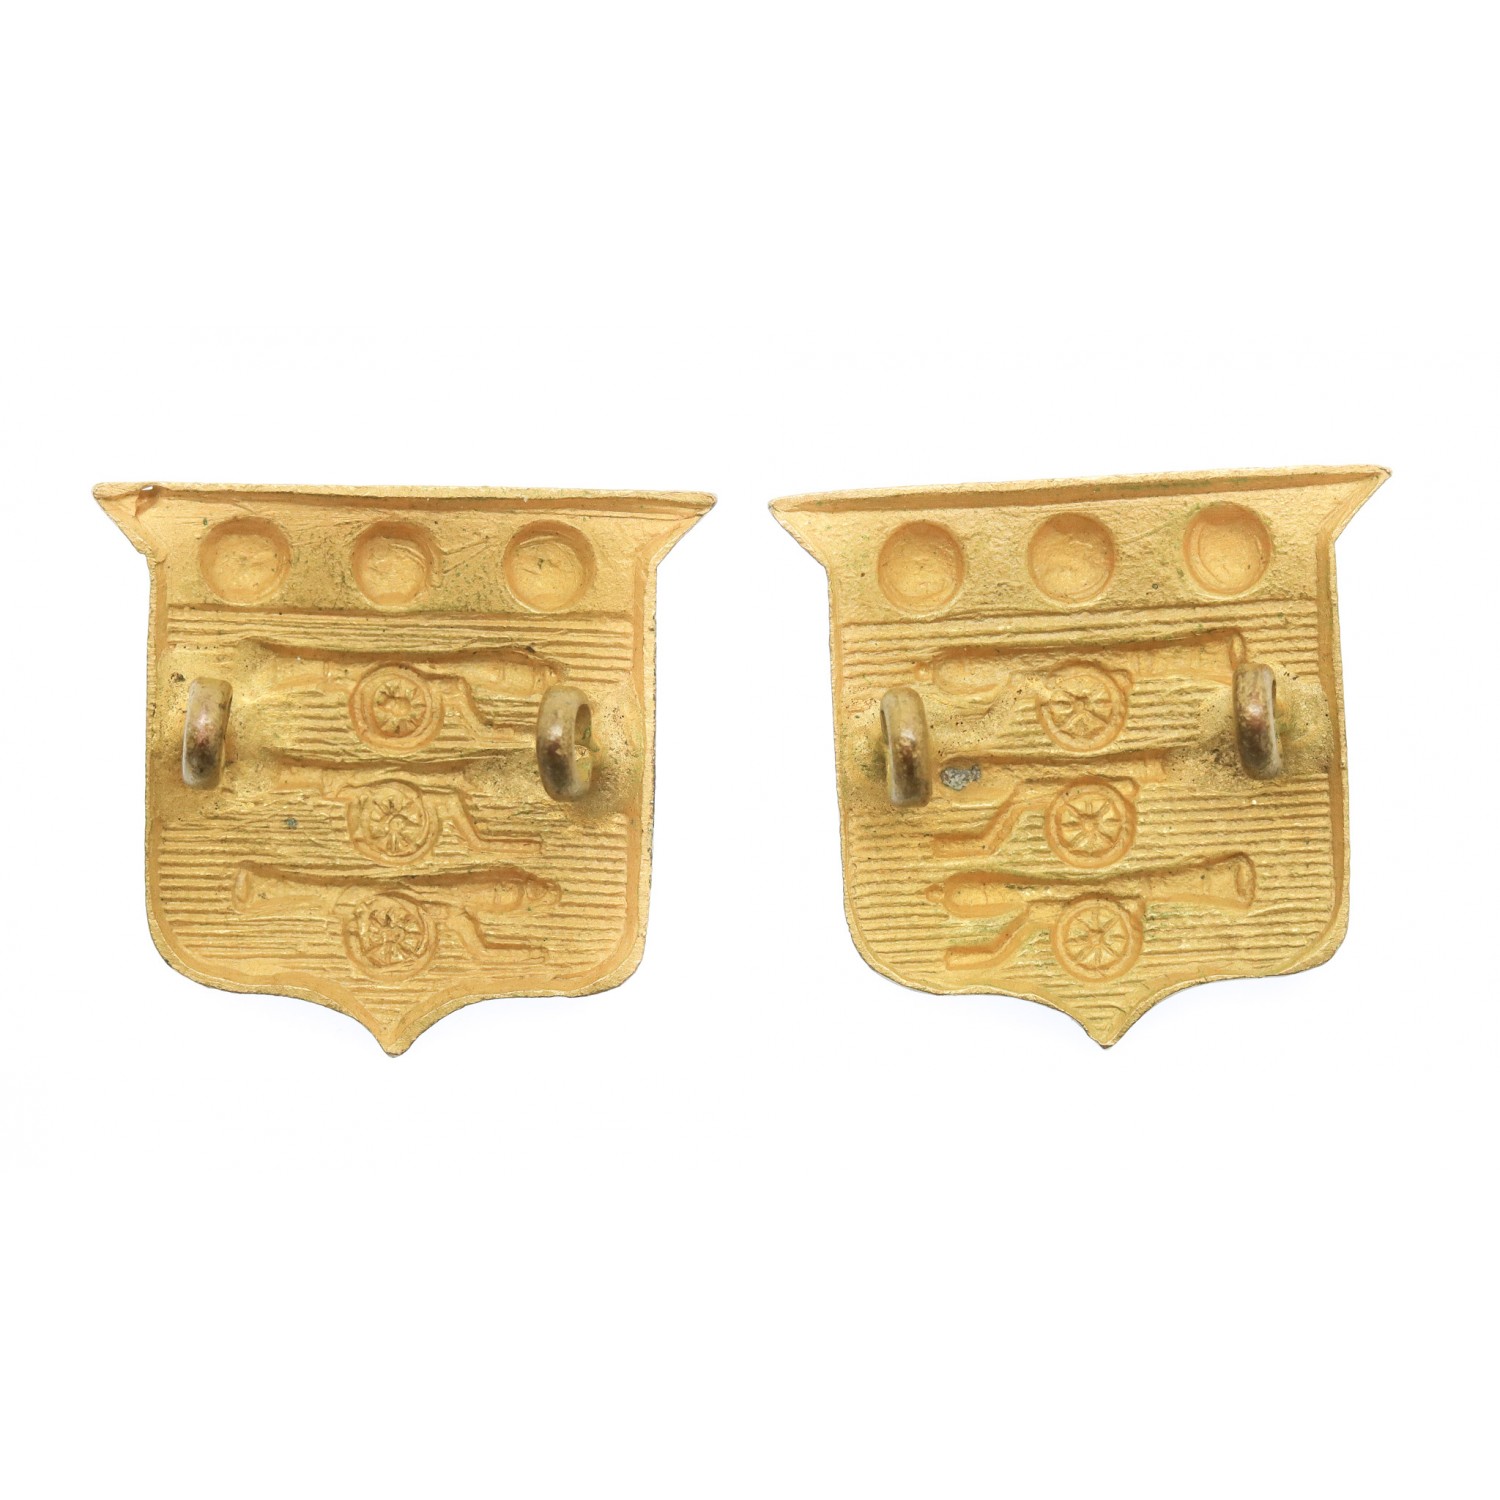 Pair of Army Ordnance Corps Officer's Gilt Collar Badges